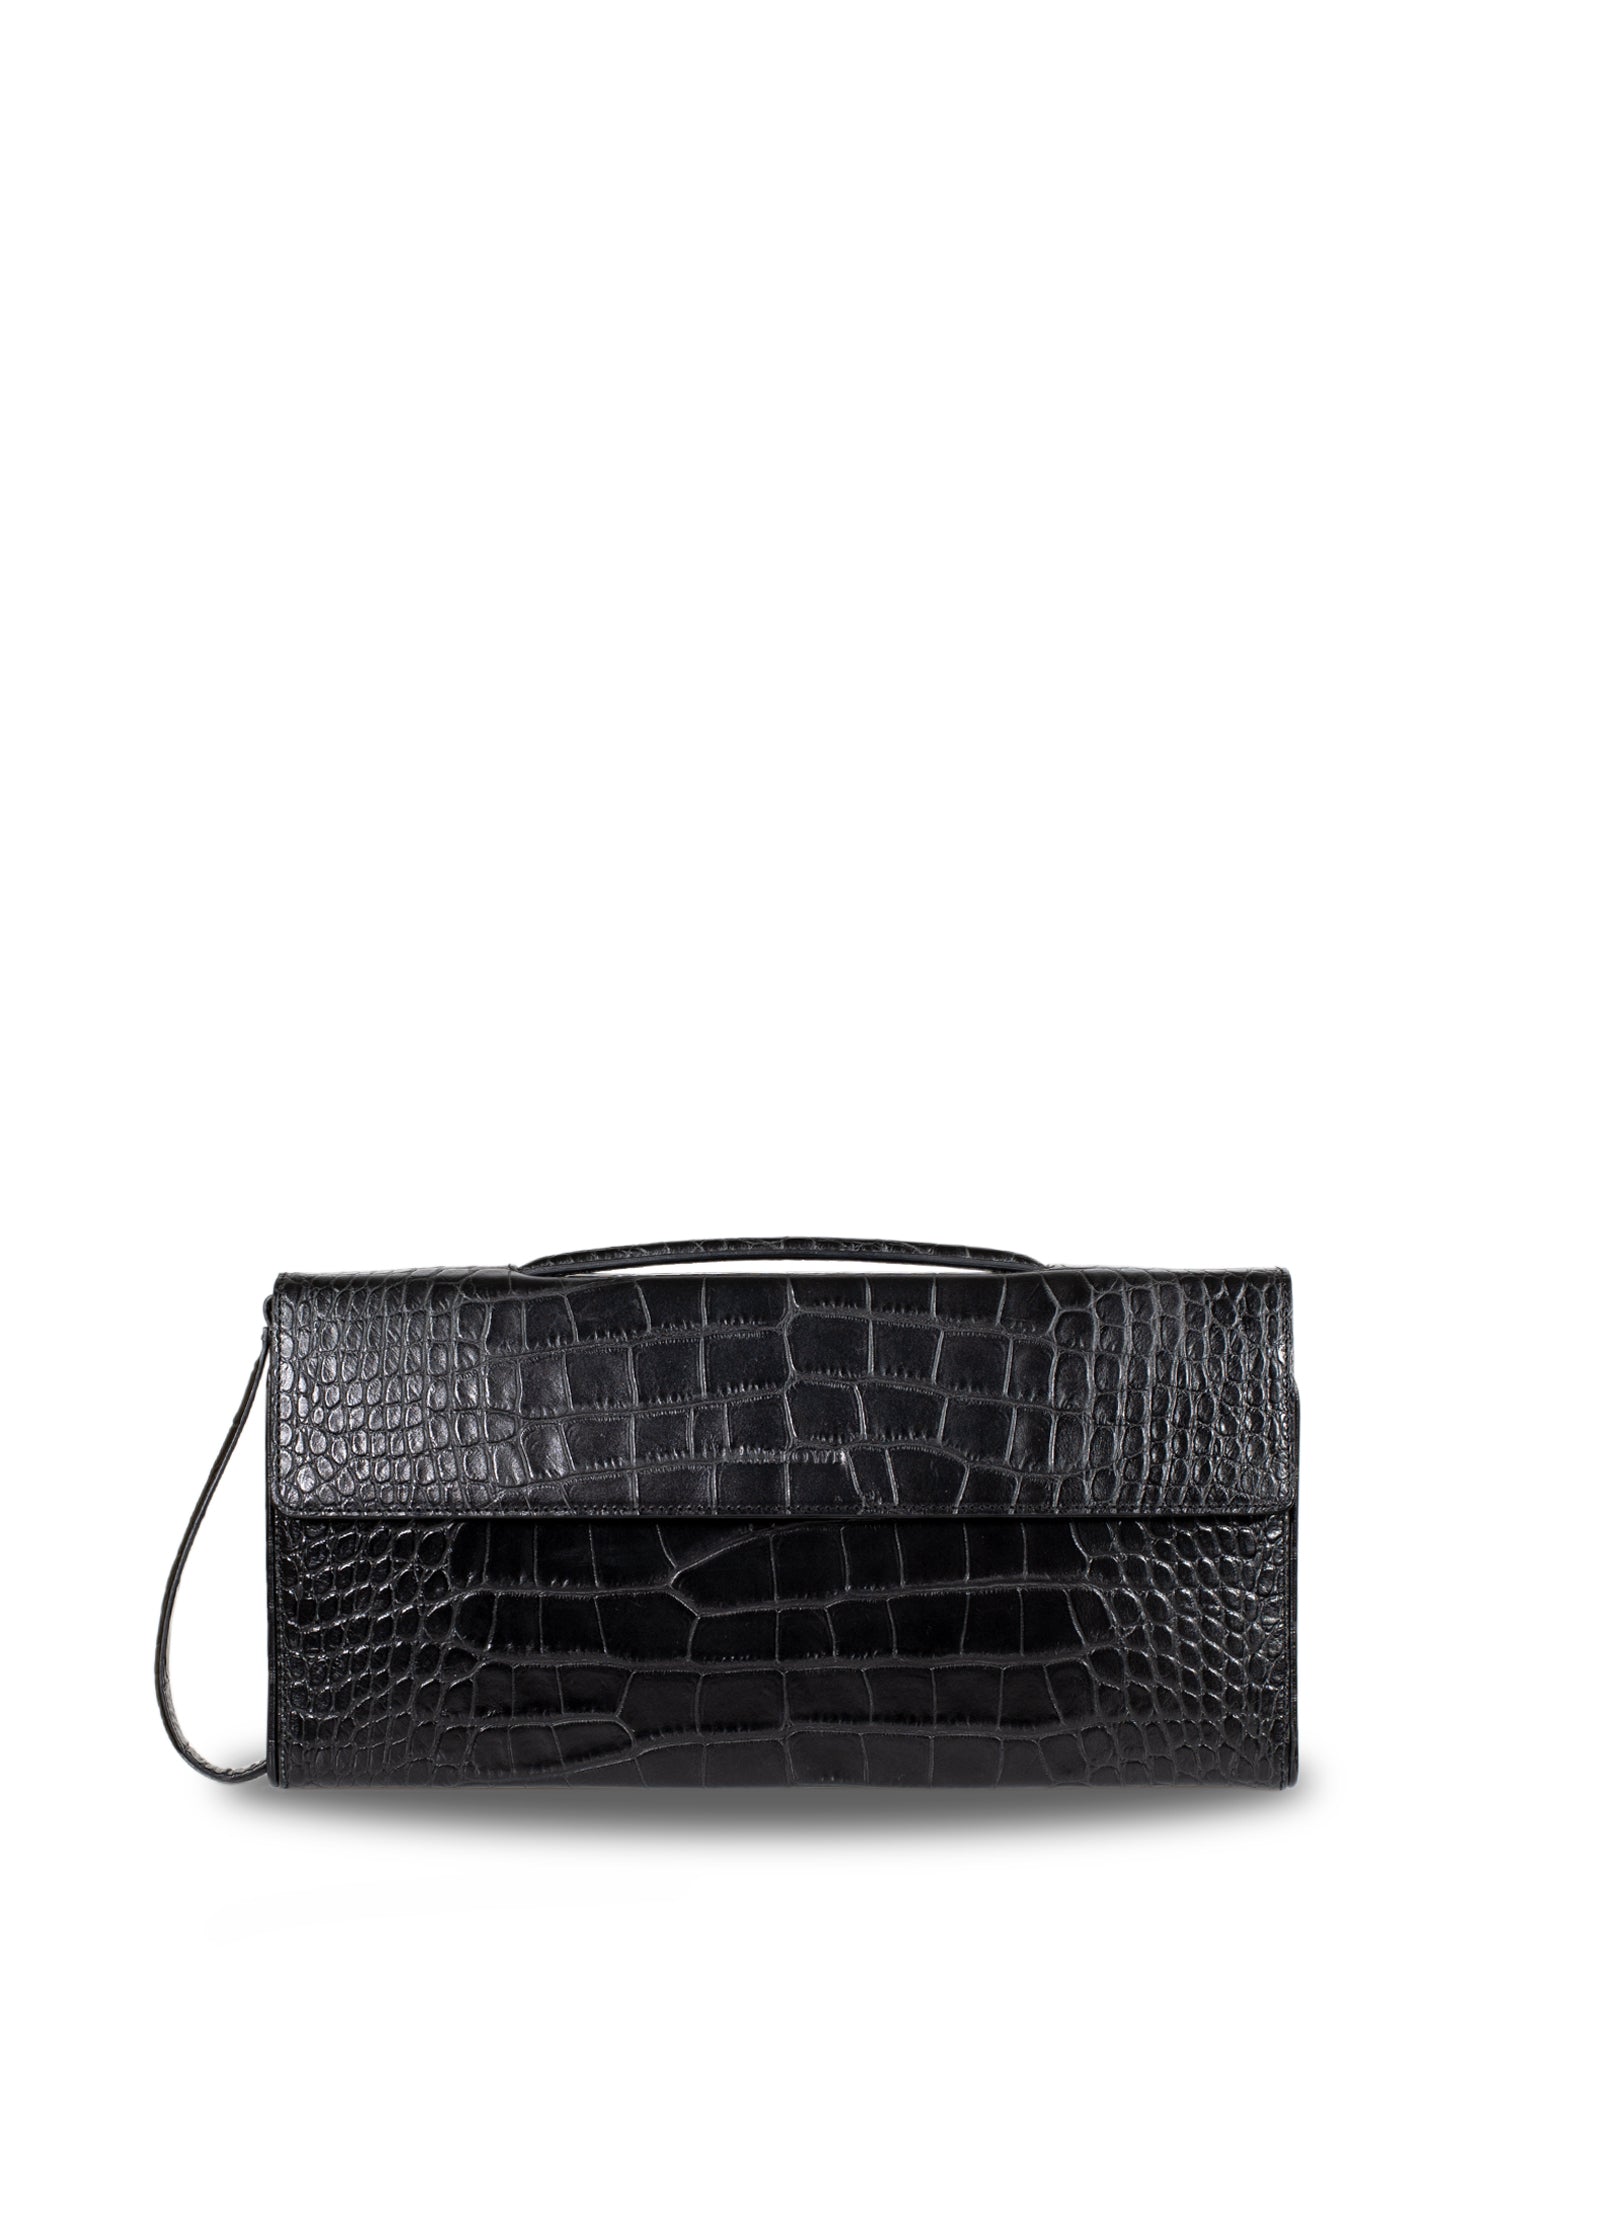 Clutch bag with wrist strap - Leather